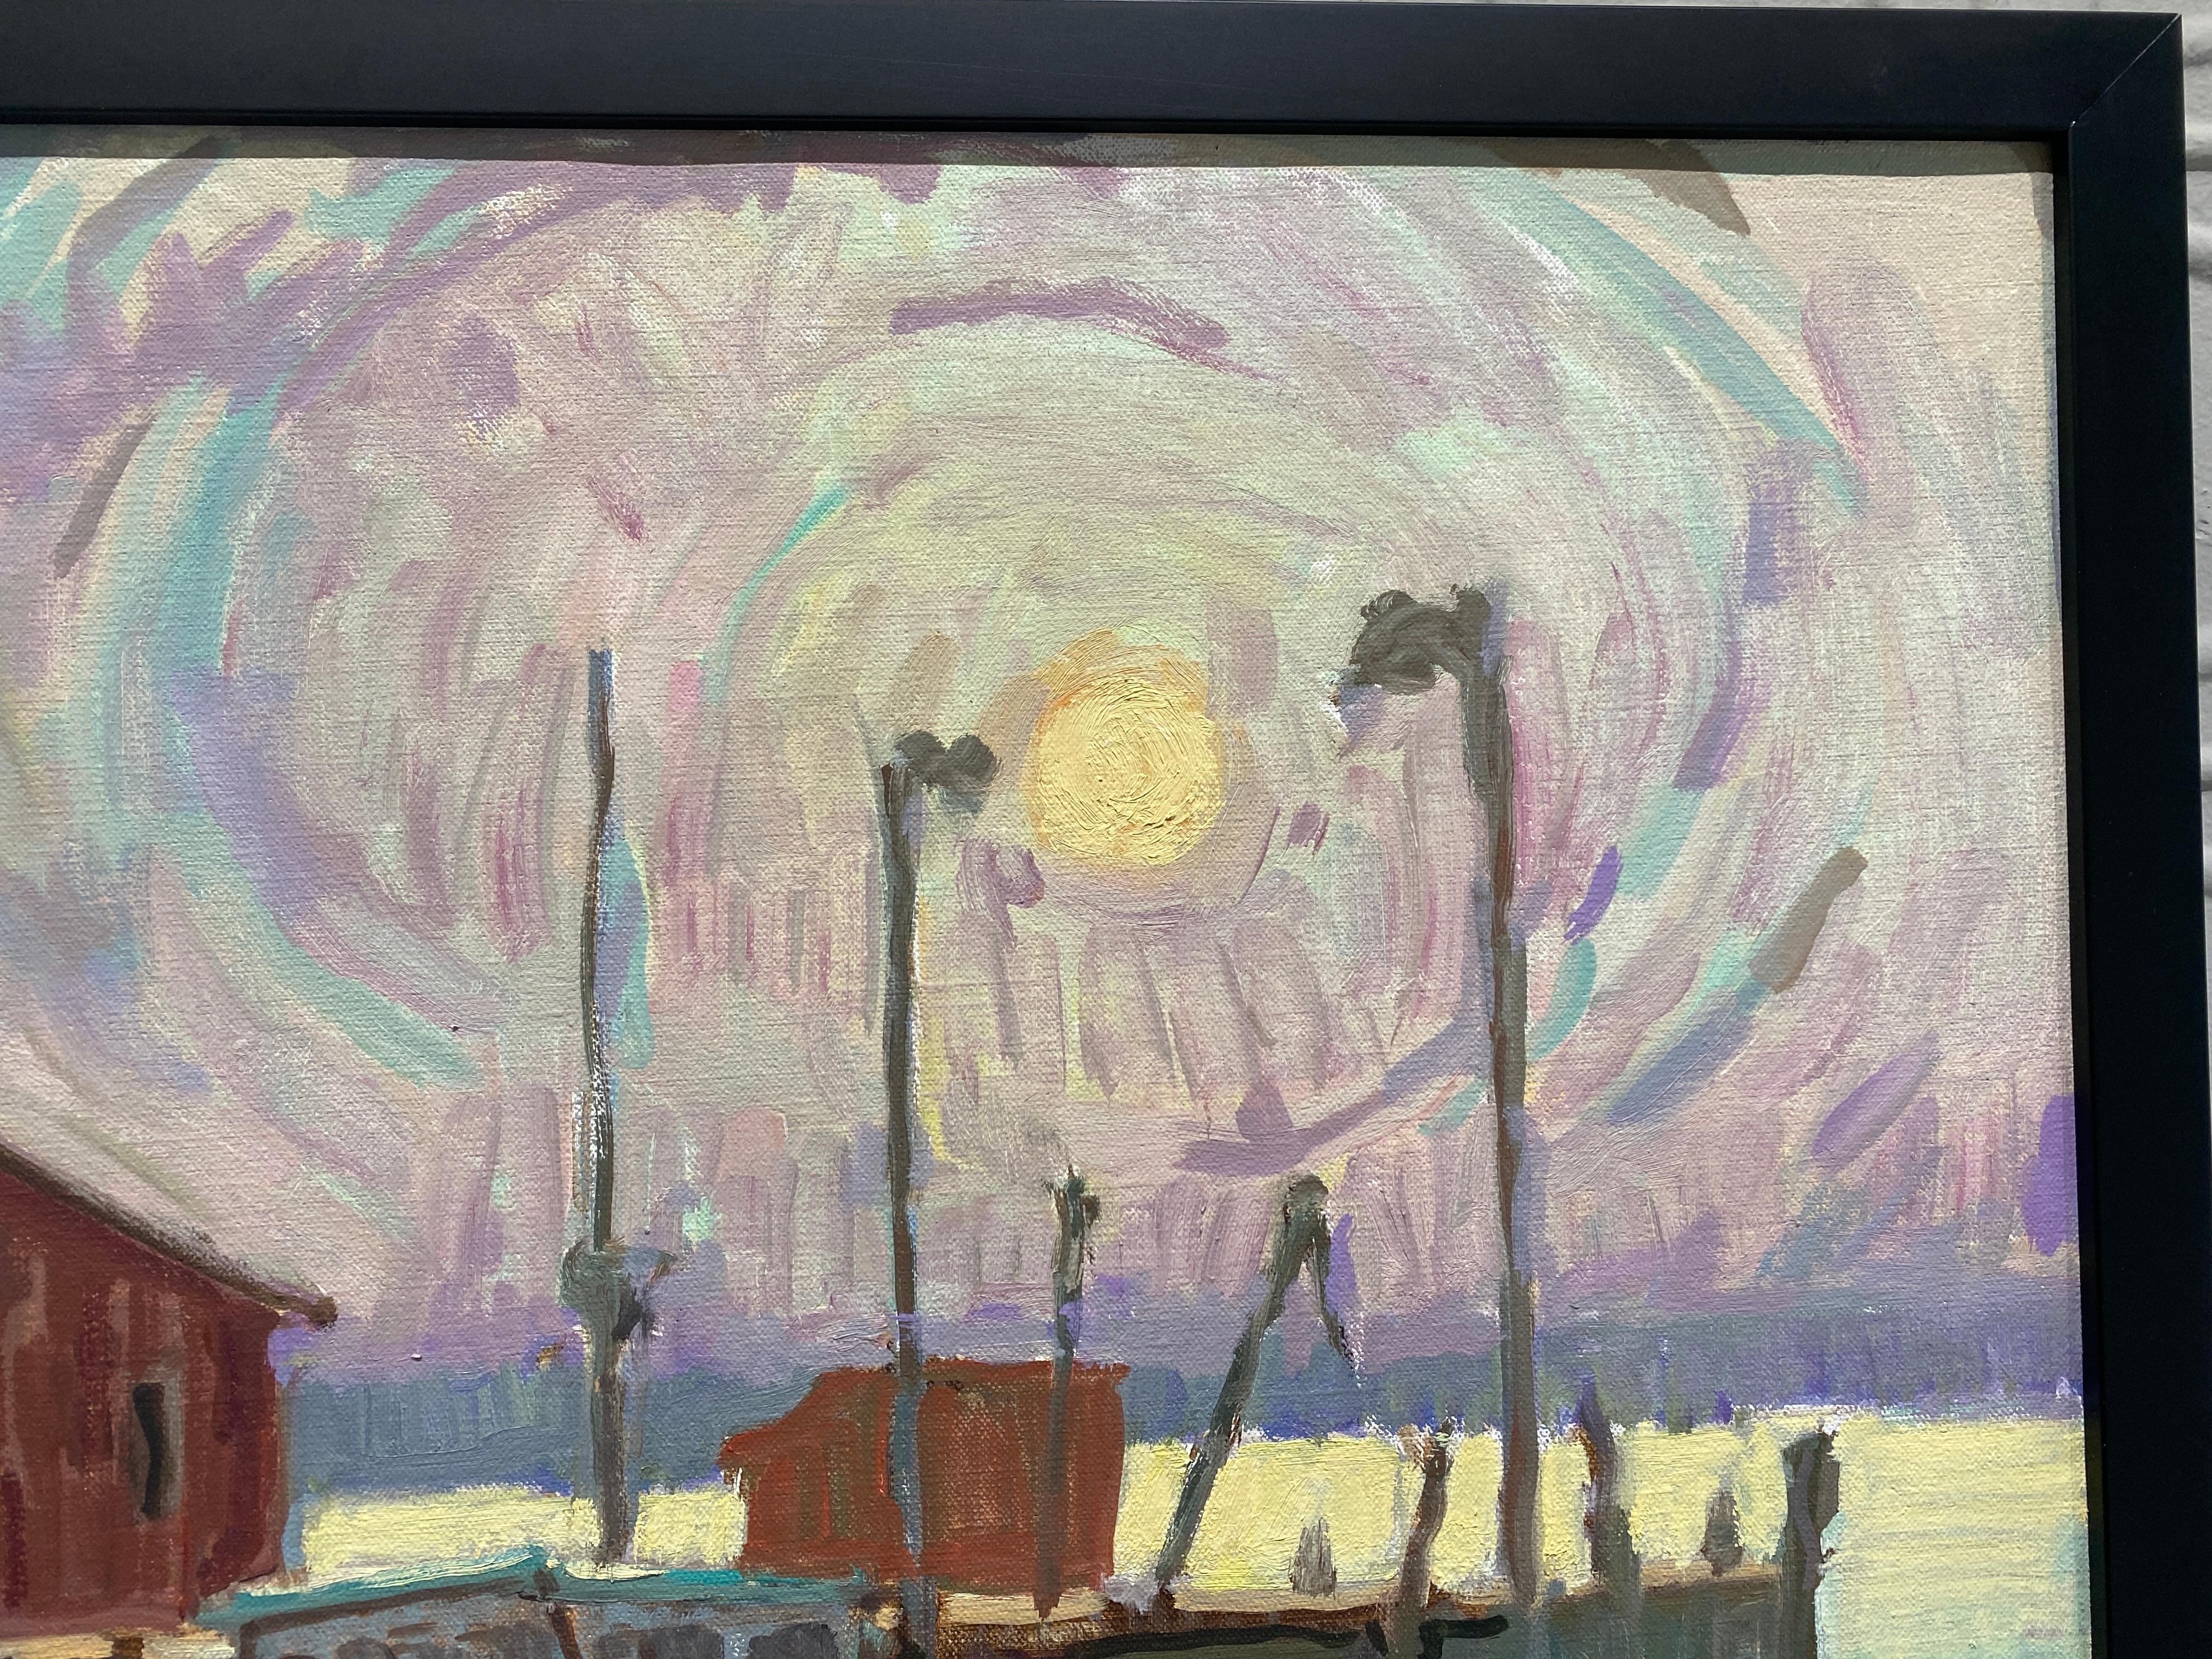 An oil painting of a seaside village at night. Light ripples out from the moon, in circular brushstrokes of violet, blue, and yellow. A red fishing boat rests alongside a dock adorned with a grouping of shacks or dories. The water reflects the